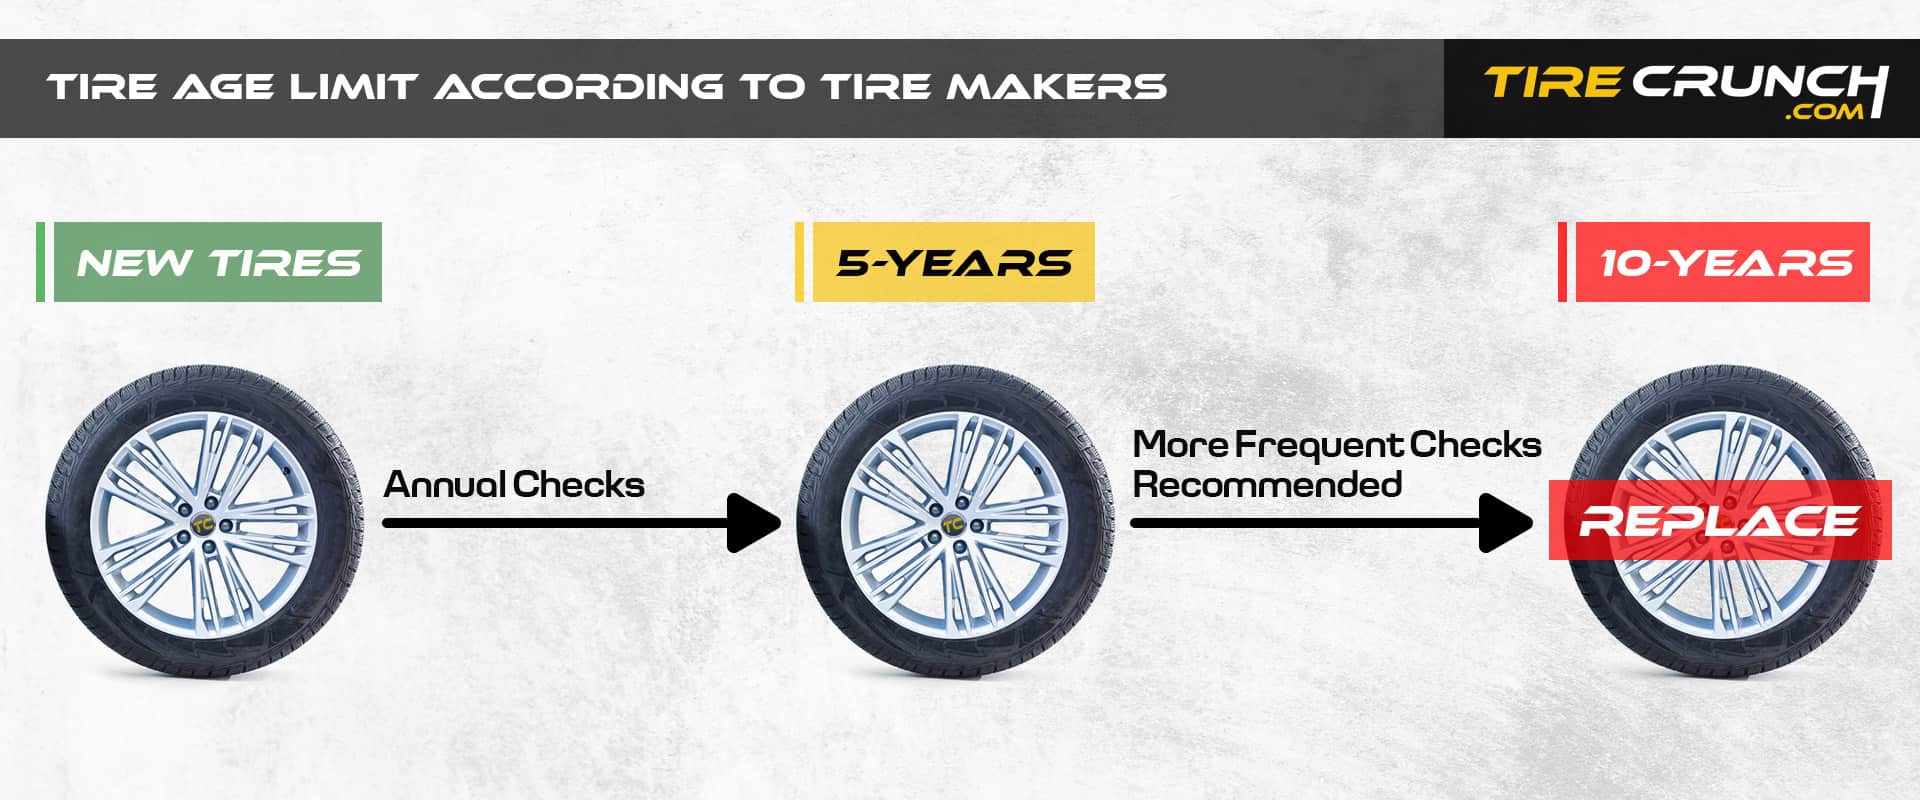 Tire age limit according to tire manufactrurers